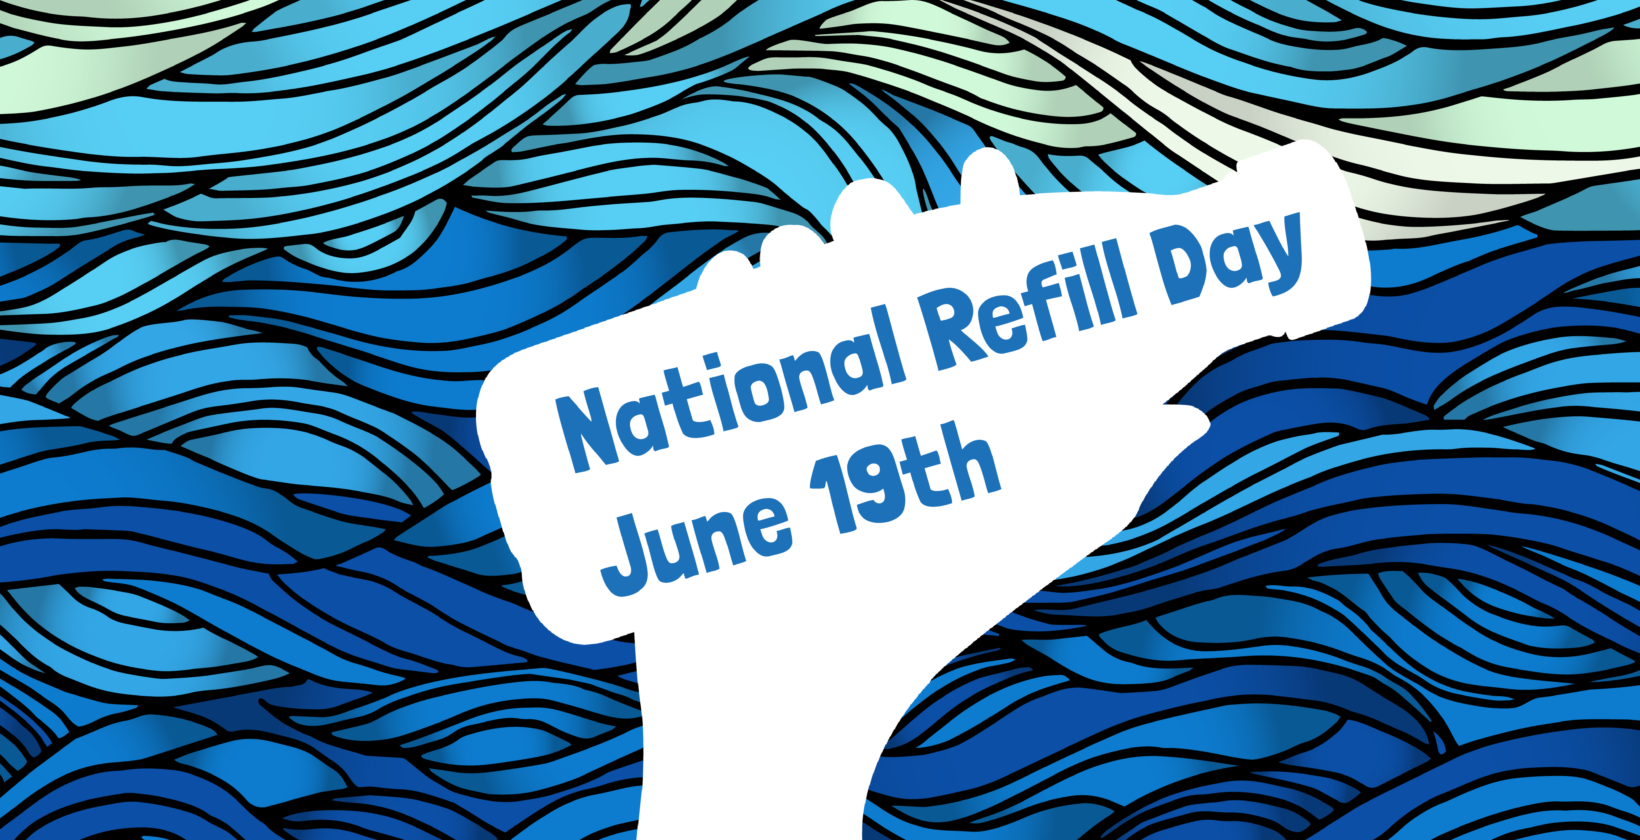 National Refill Day 2019: Public urged to show they’ve #GotTheBottle to ditch single use plastic